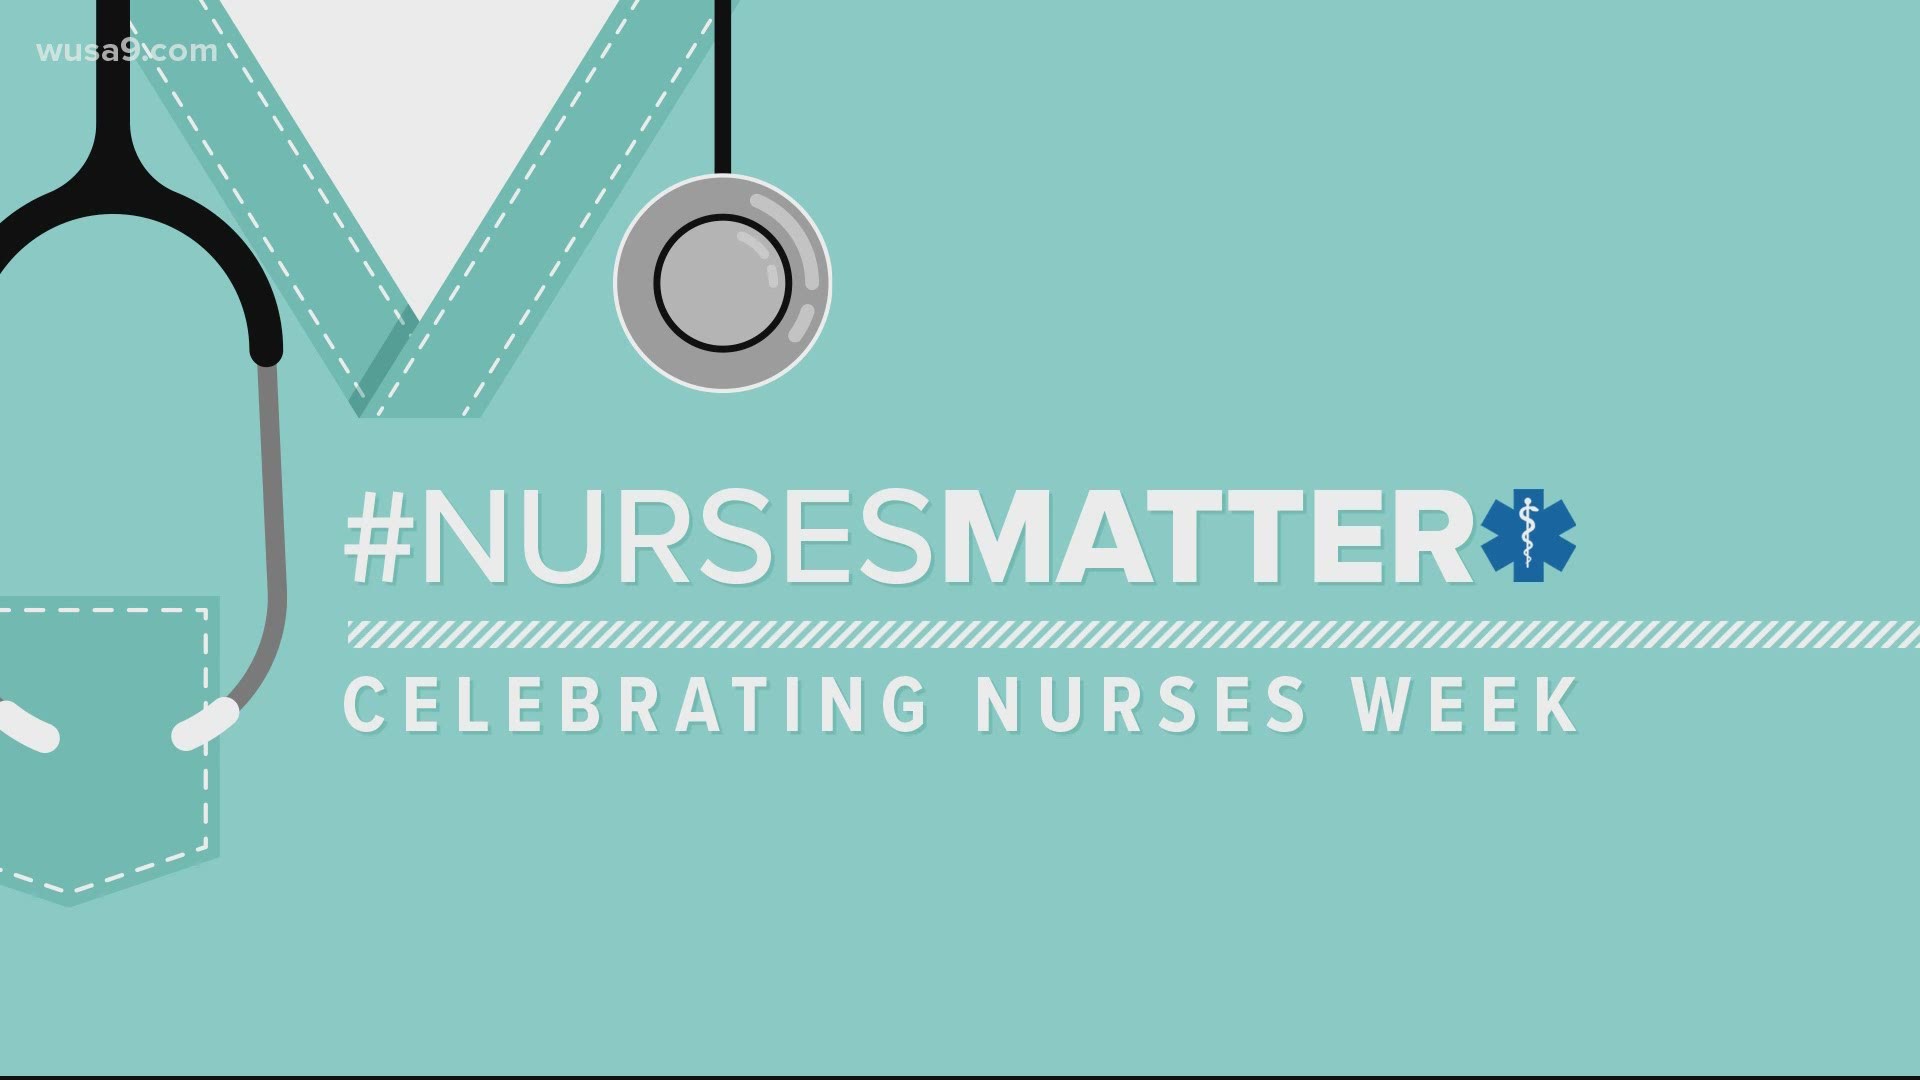 DC Mayor Bowser shared appreciation for her favorite nurse, her mother Joan Bowser, during Nurses Week and encouraged everyone to thank healthcare workers.